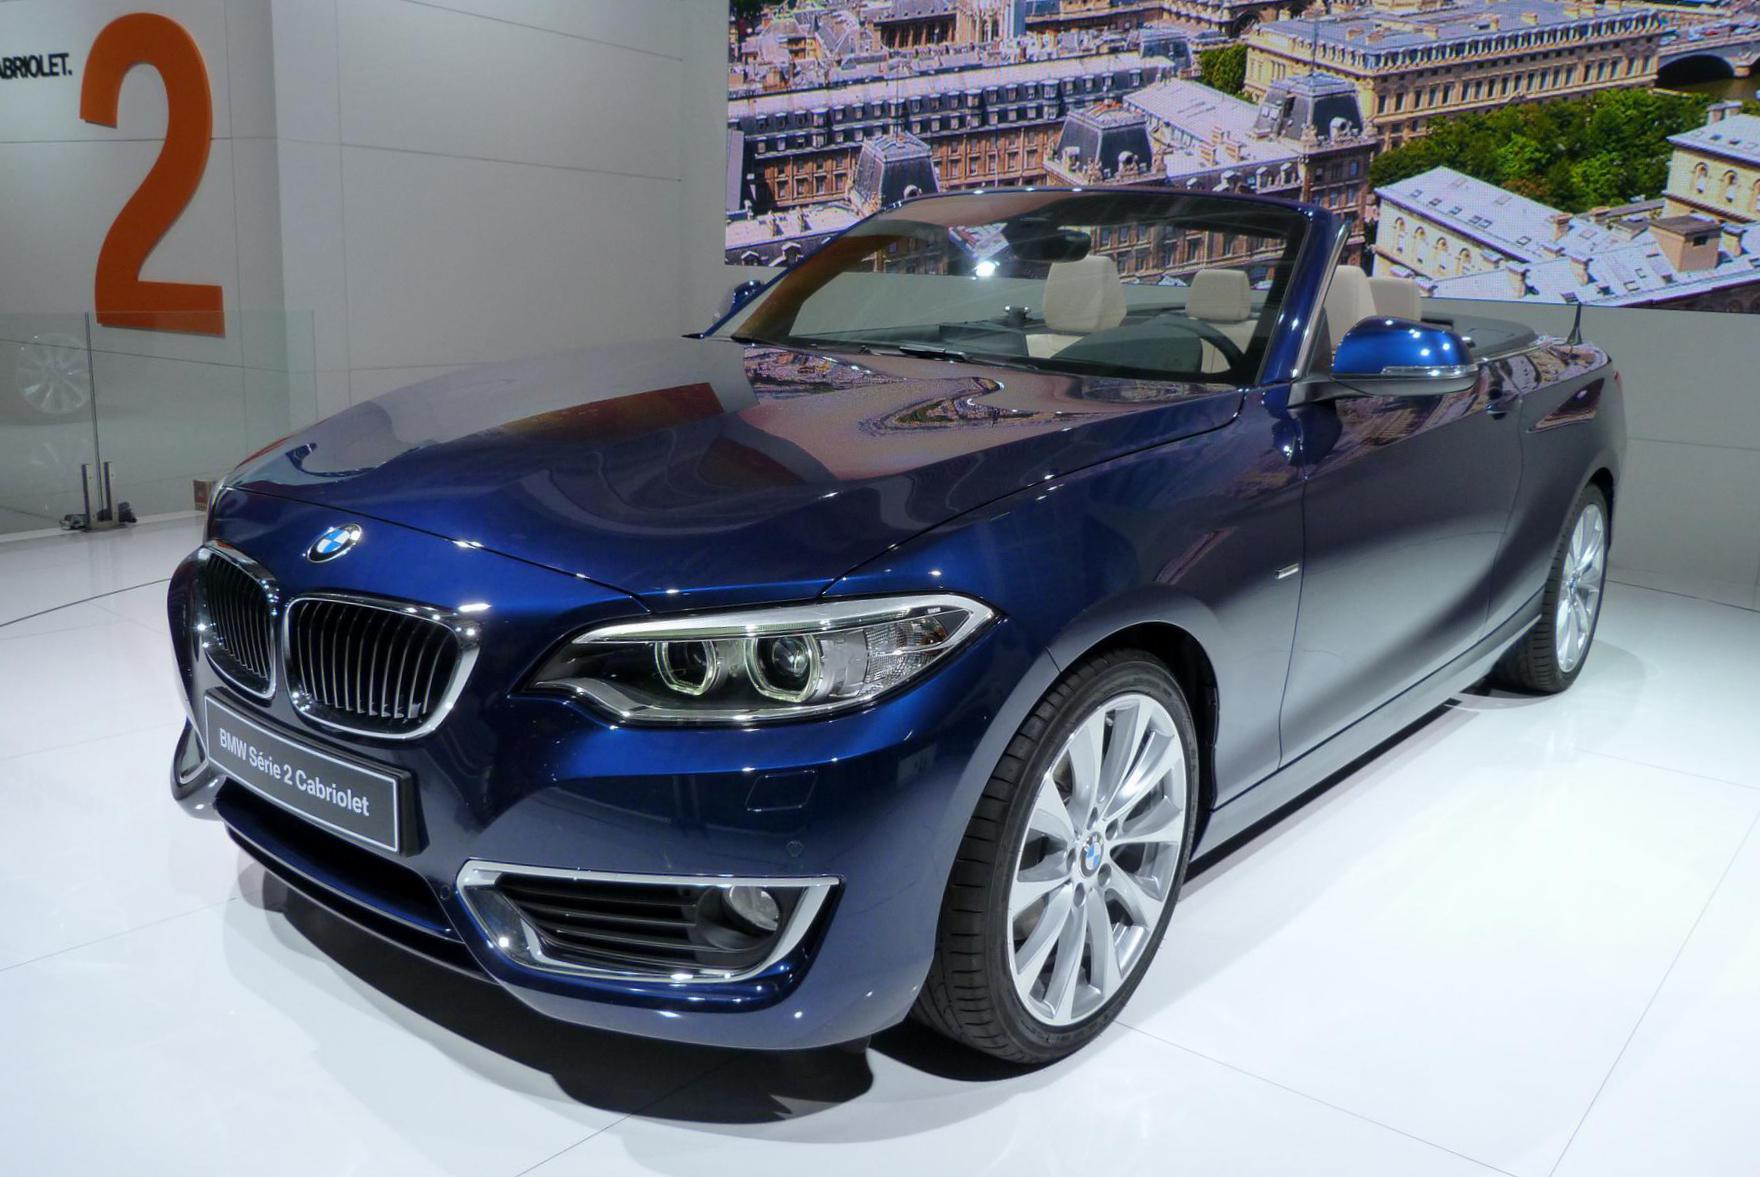 2 Series Convertible (F23) BMW configuration 2010